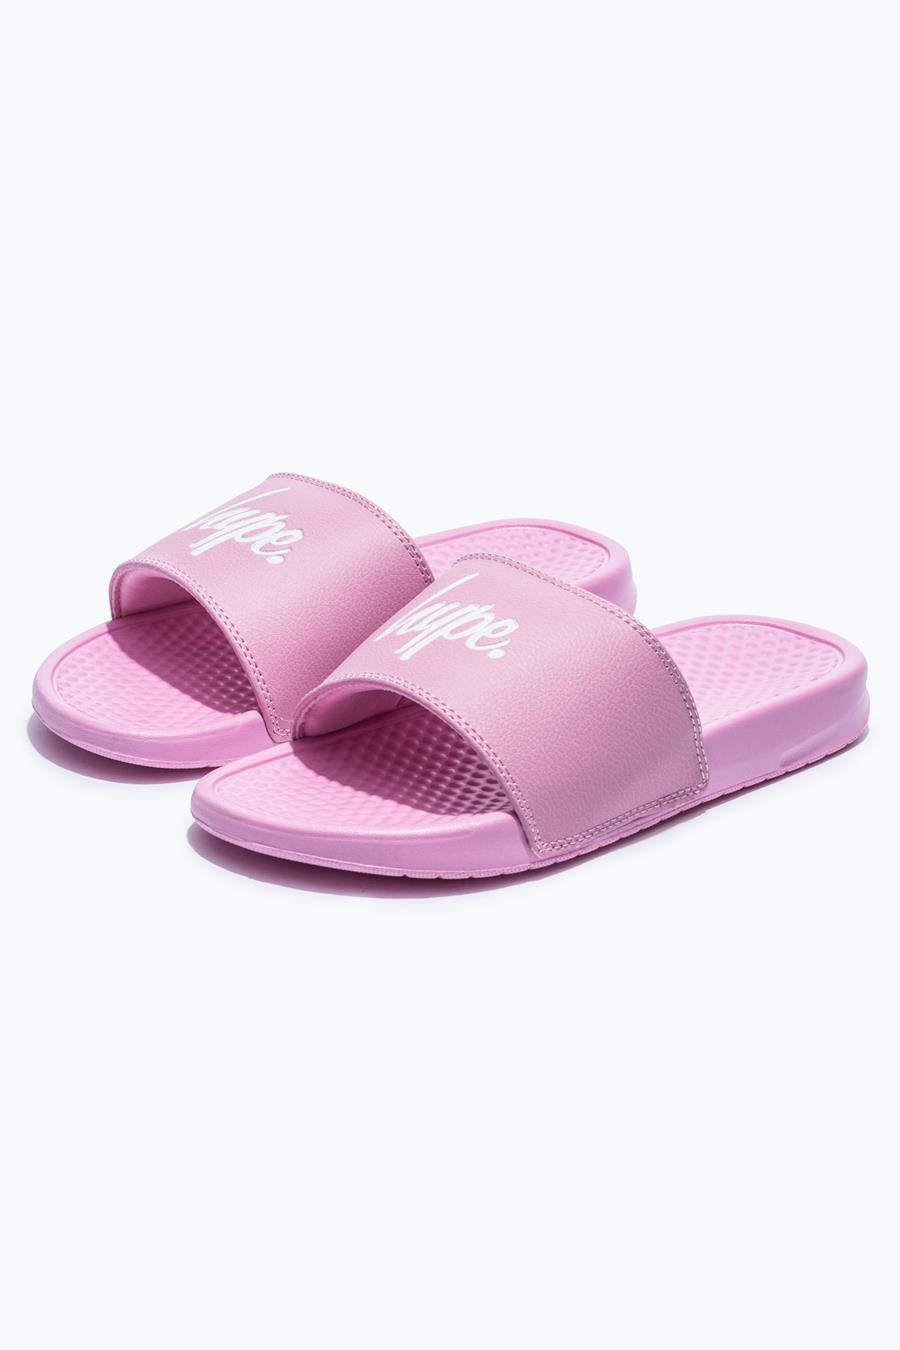 HYPE PINK WOMENS CORE SLIDERS